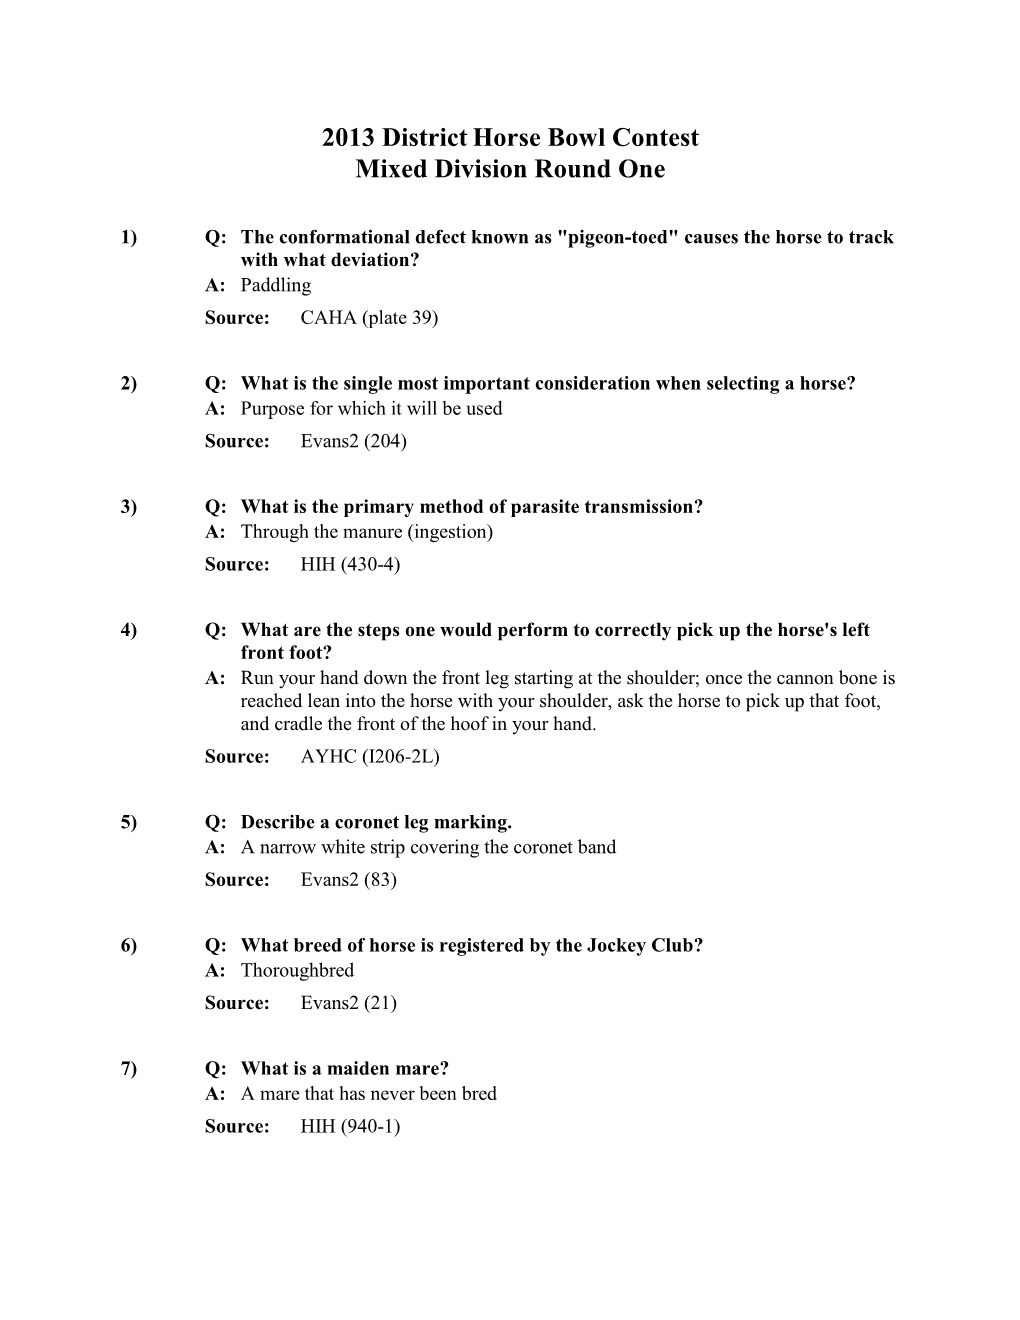 2013 District Mixed Division Horse Bowl Questions